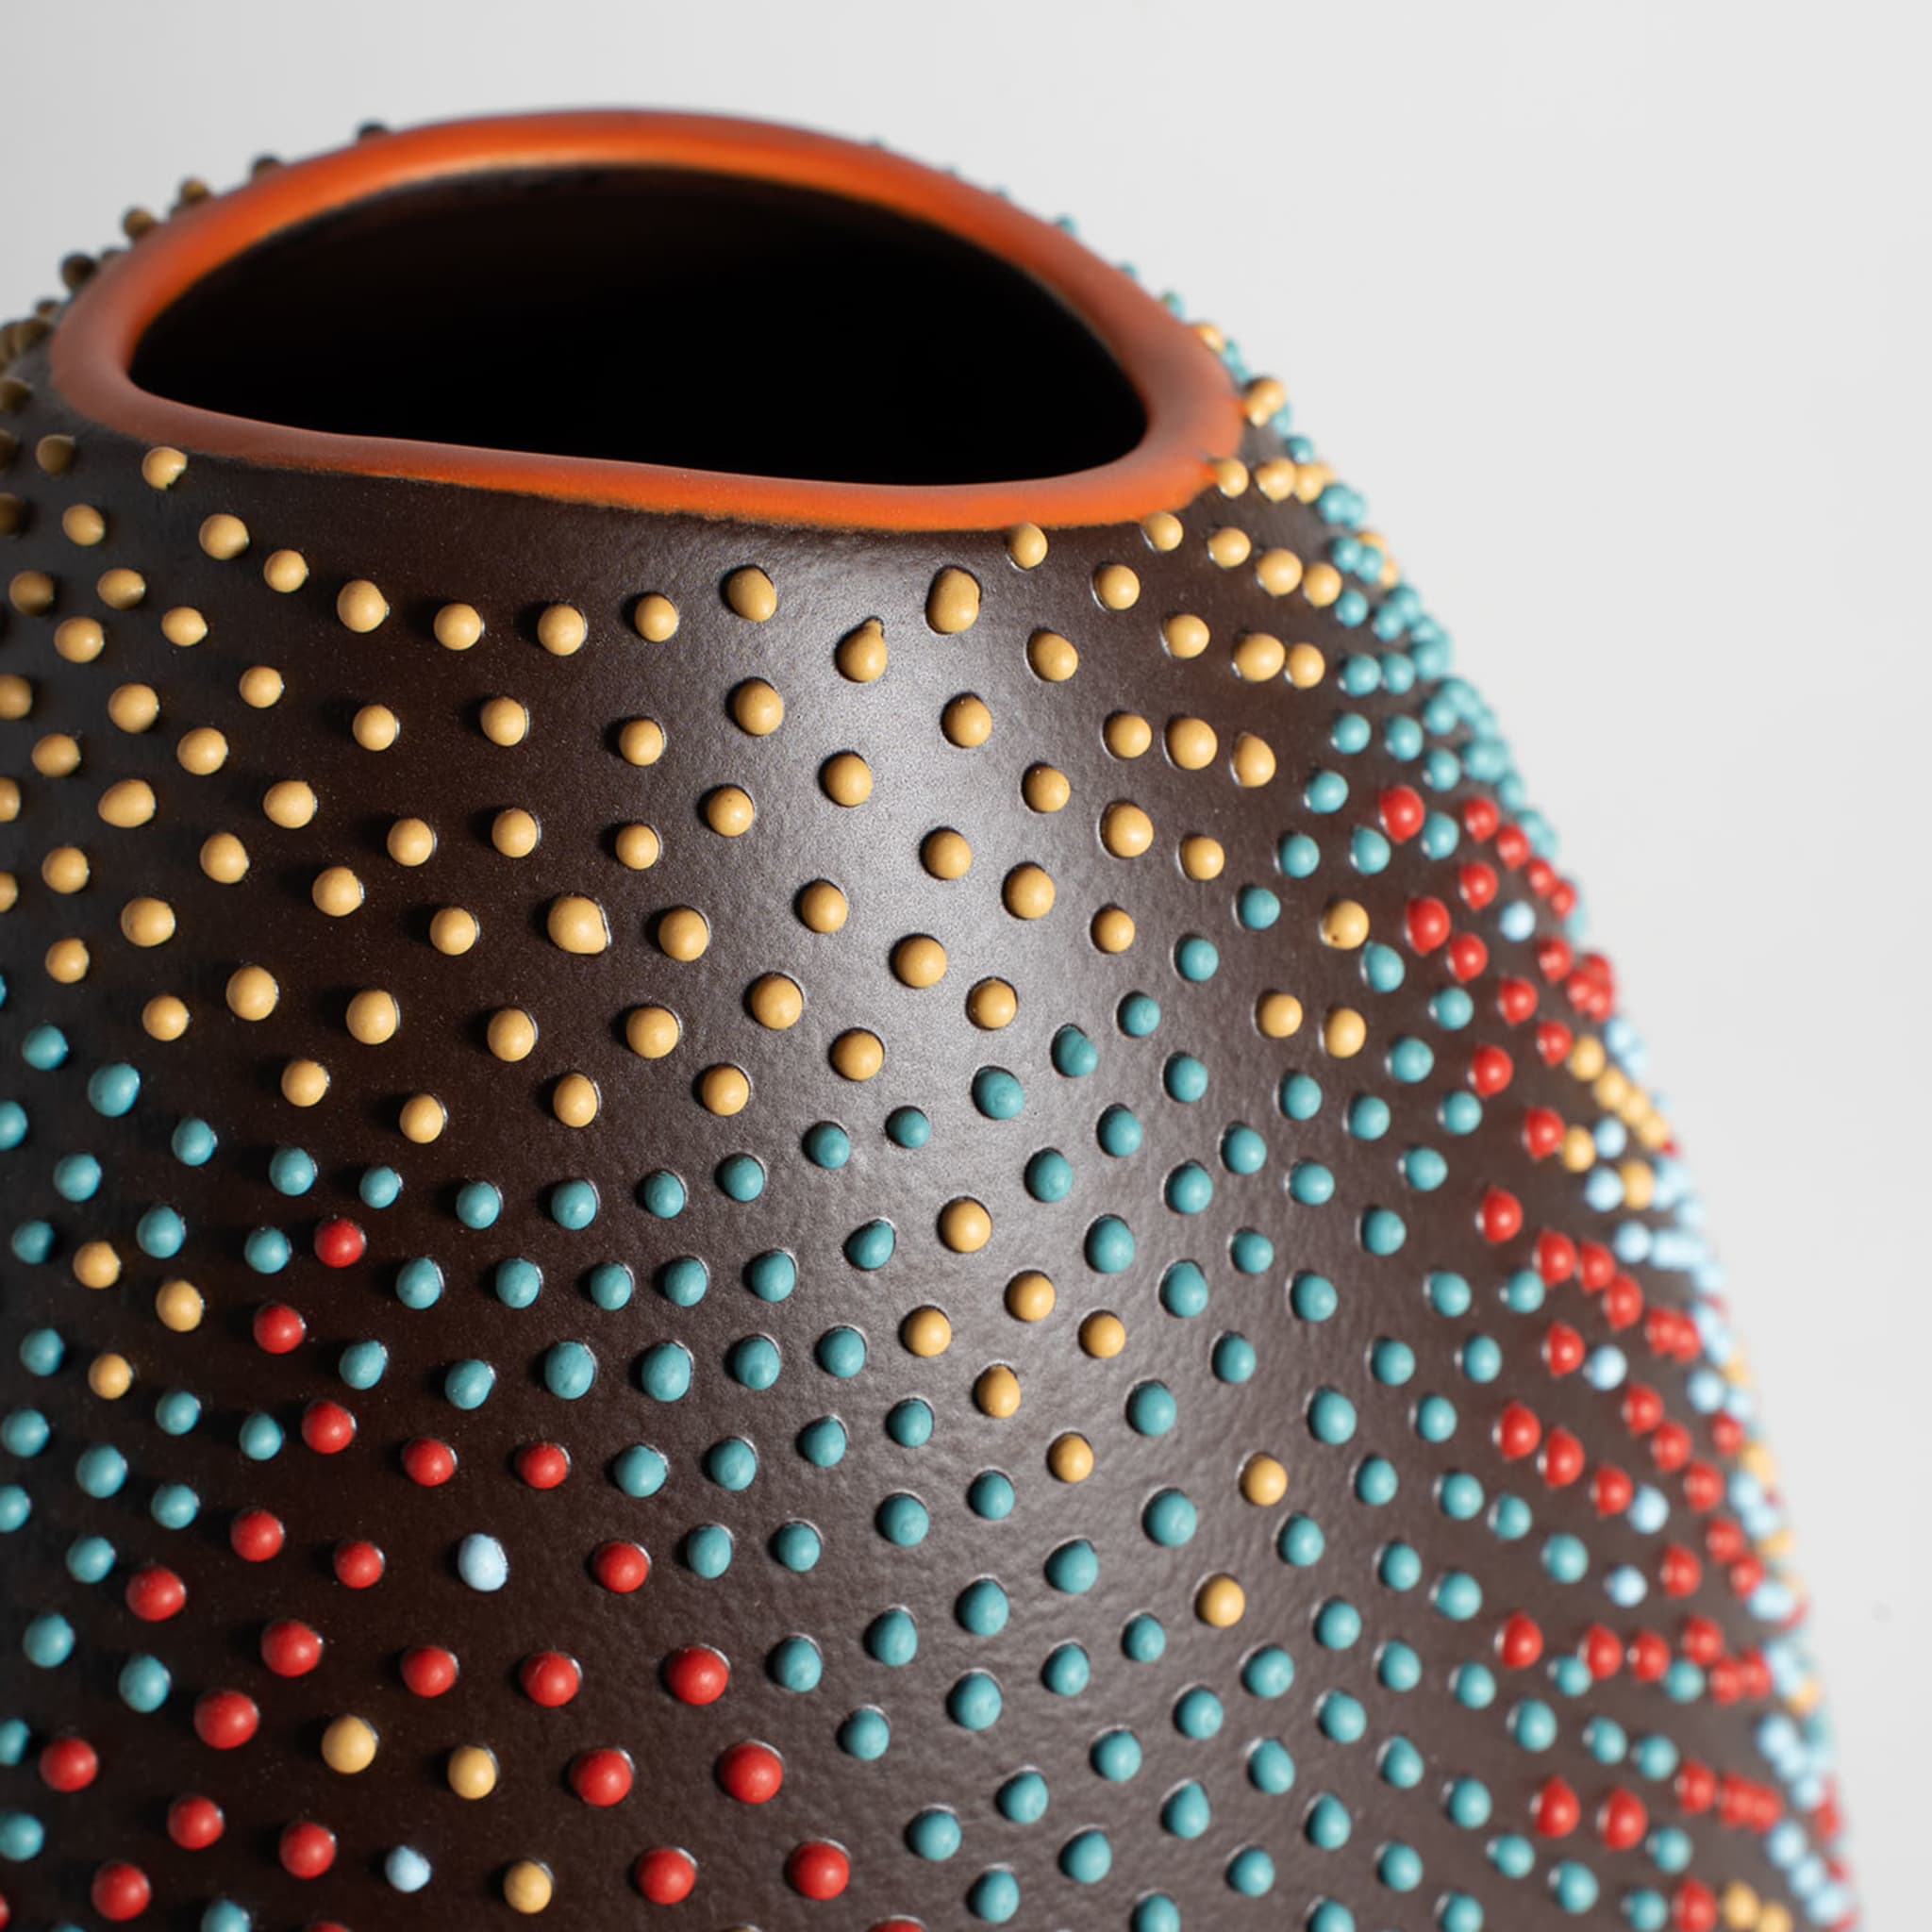 RIC-4 Chameleon Polychrome Vase by A. Mancuso/Analogia Projects - Alternative view 2